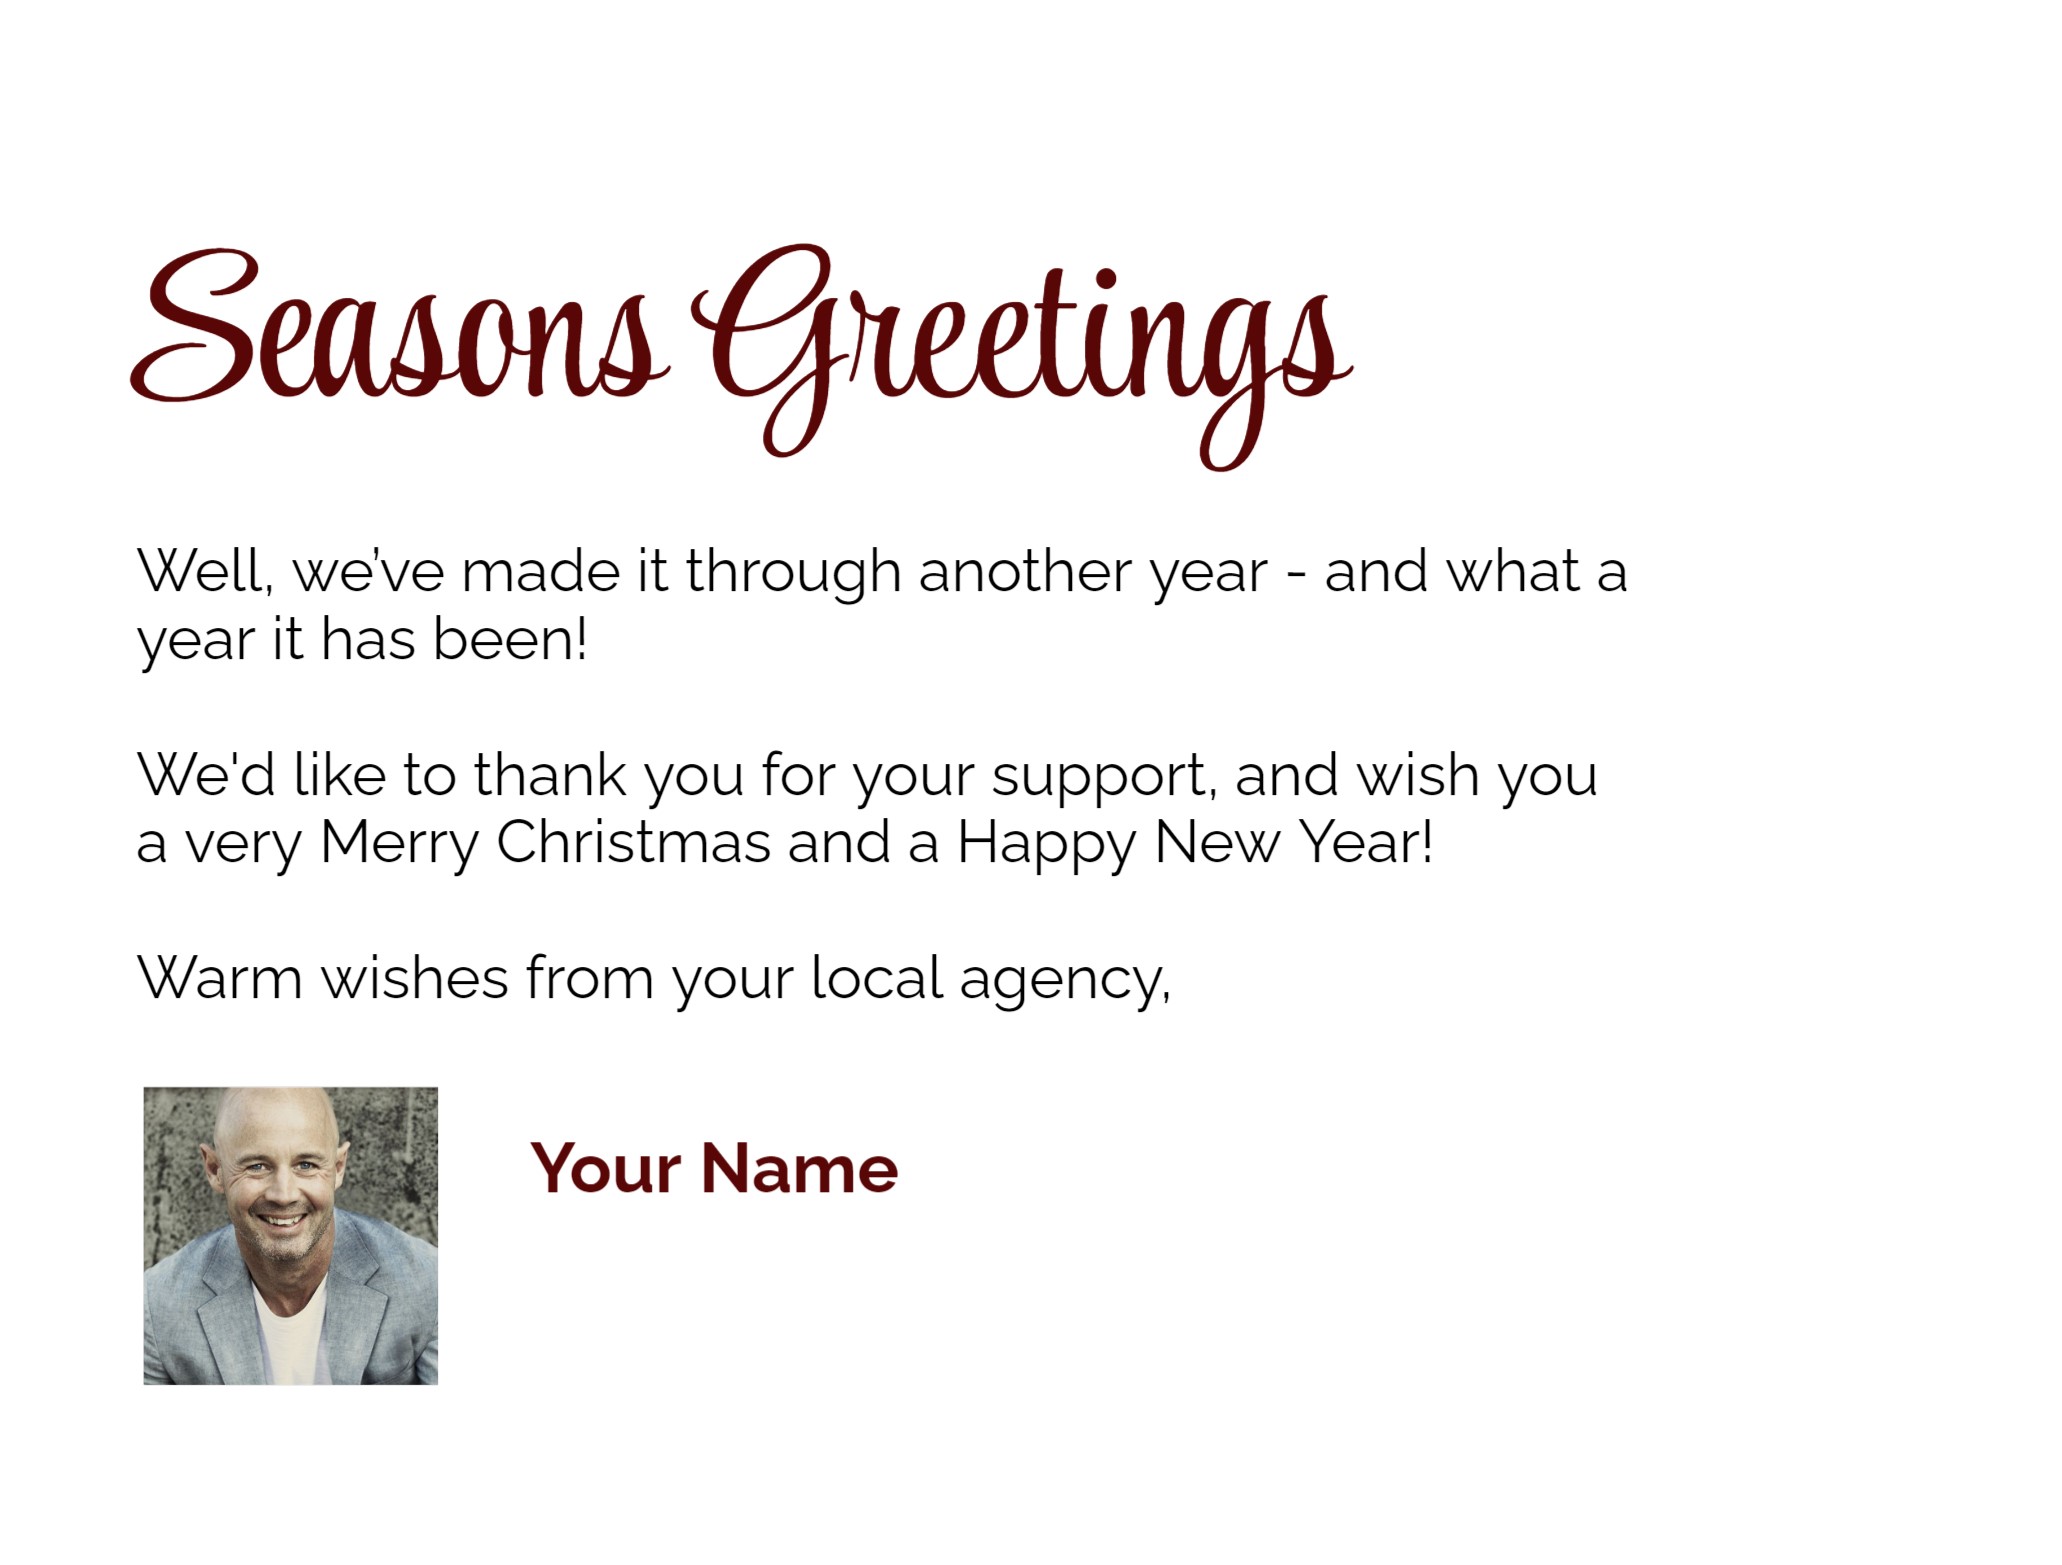 Inside message of a realtor holiday card